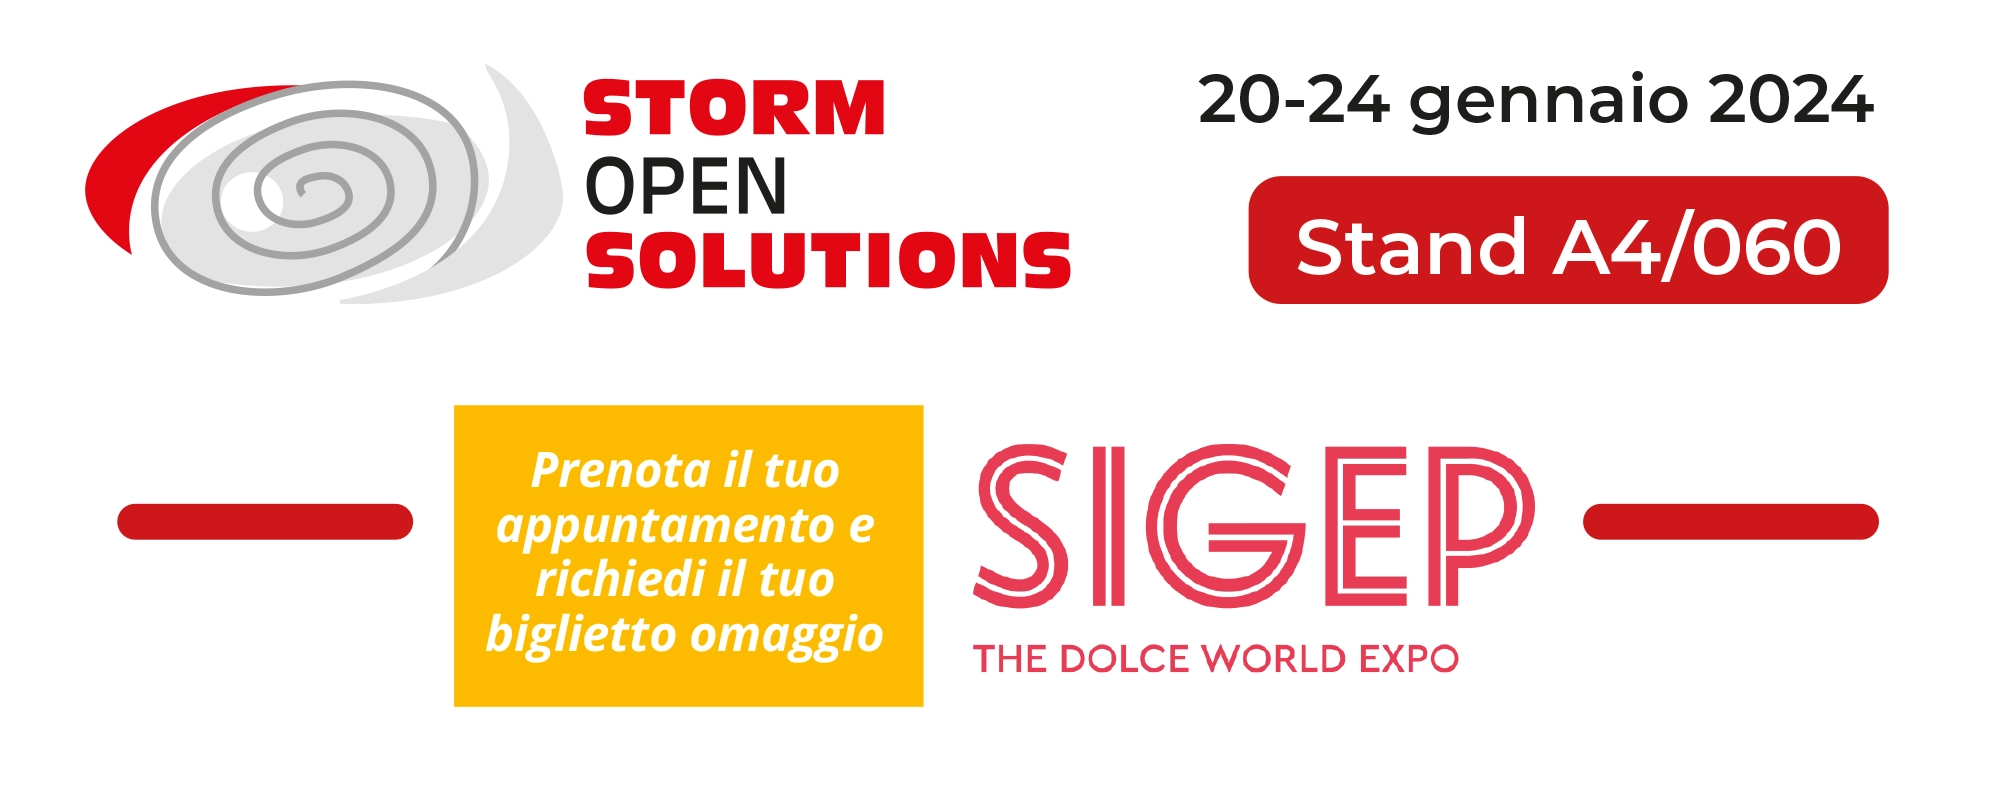 Storm open solutions - Sigep 2024